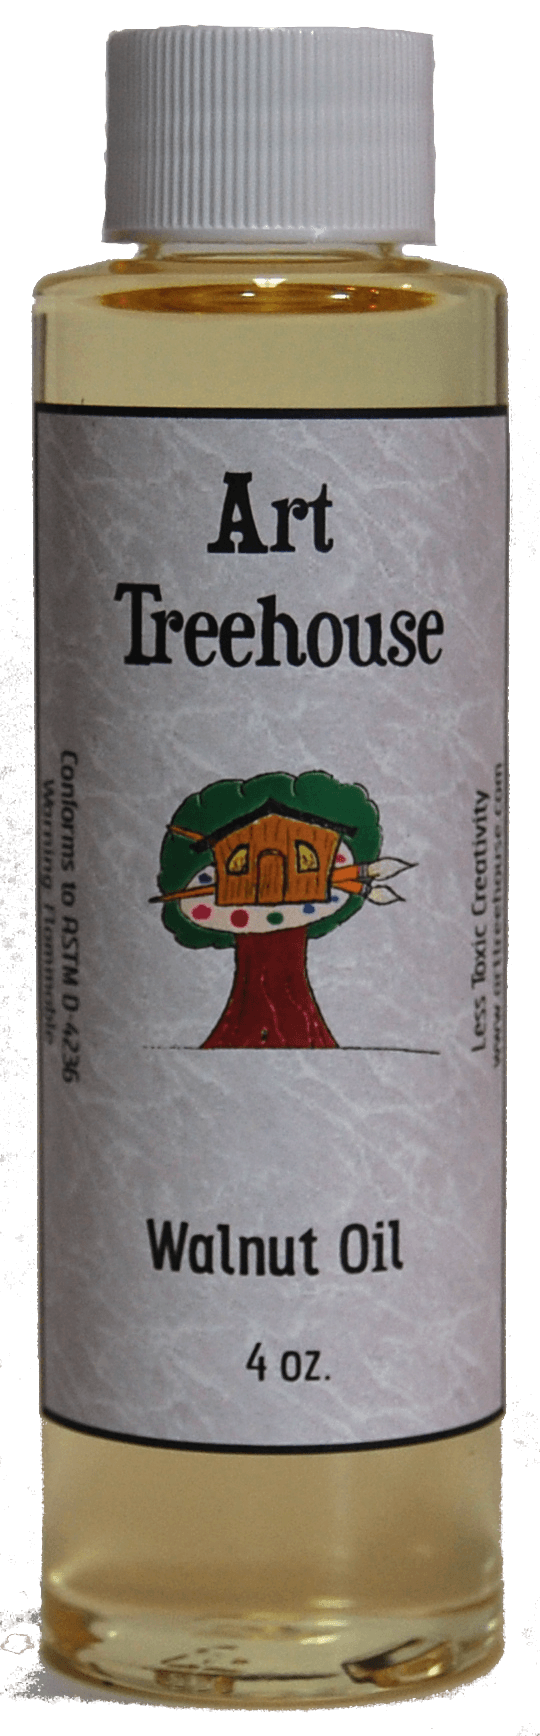 WATER-WASHED WALNUT OIL - The Art Treehouse